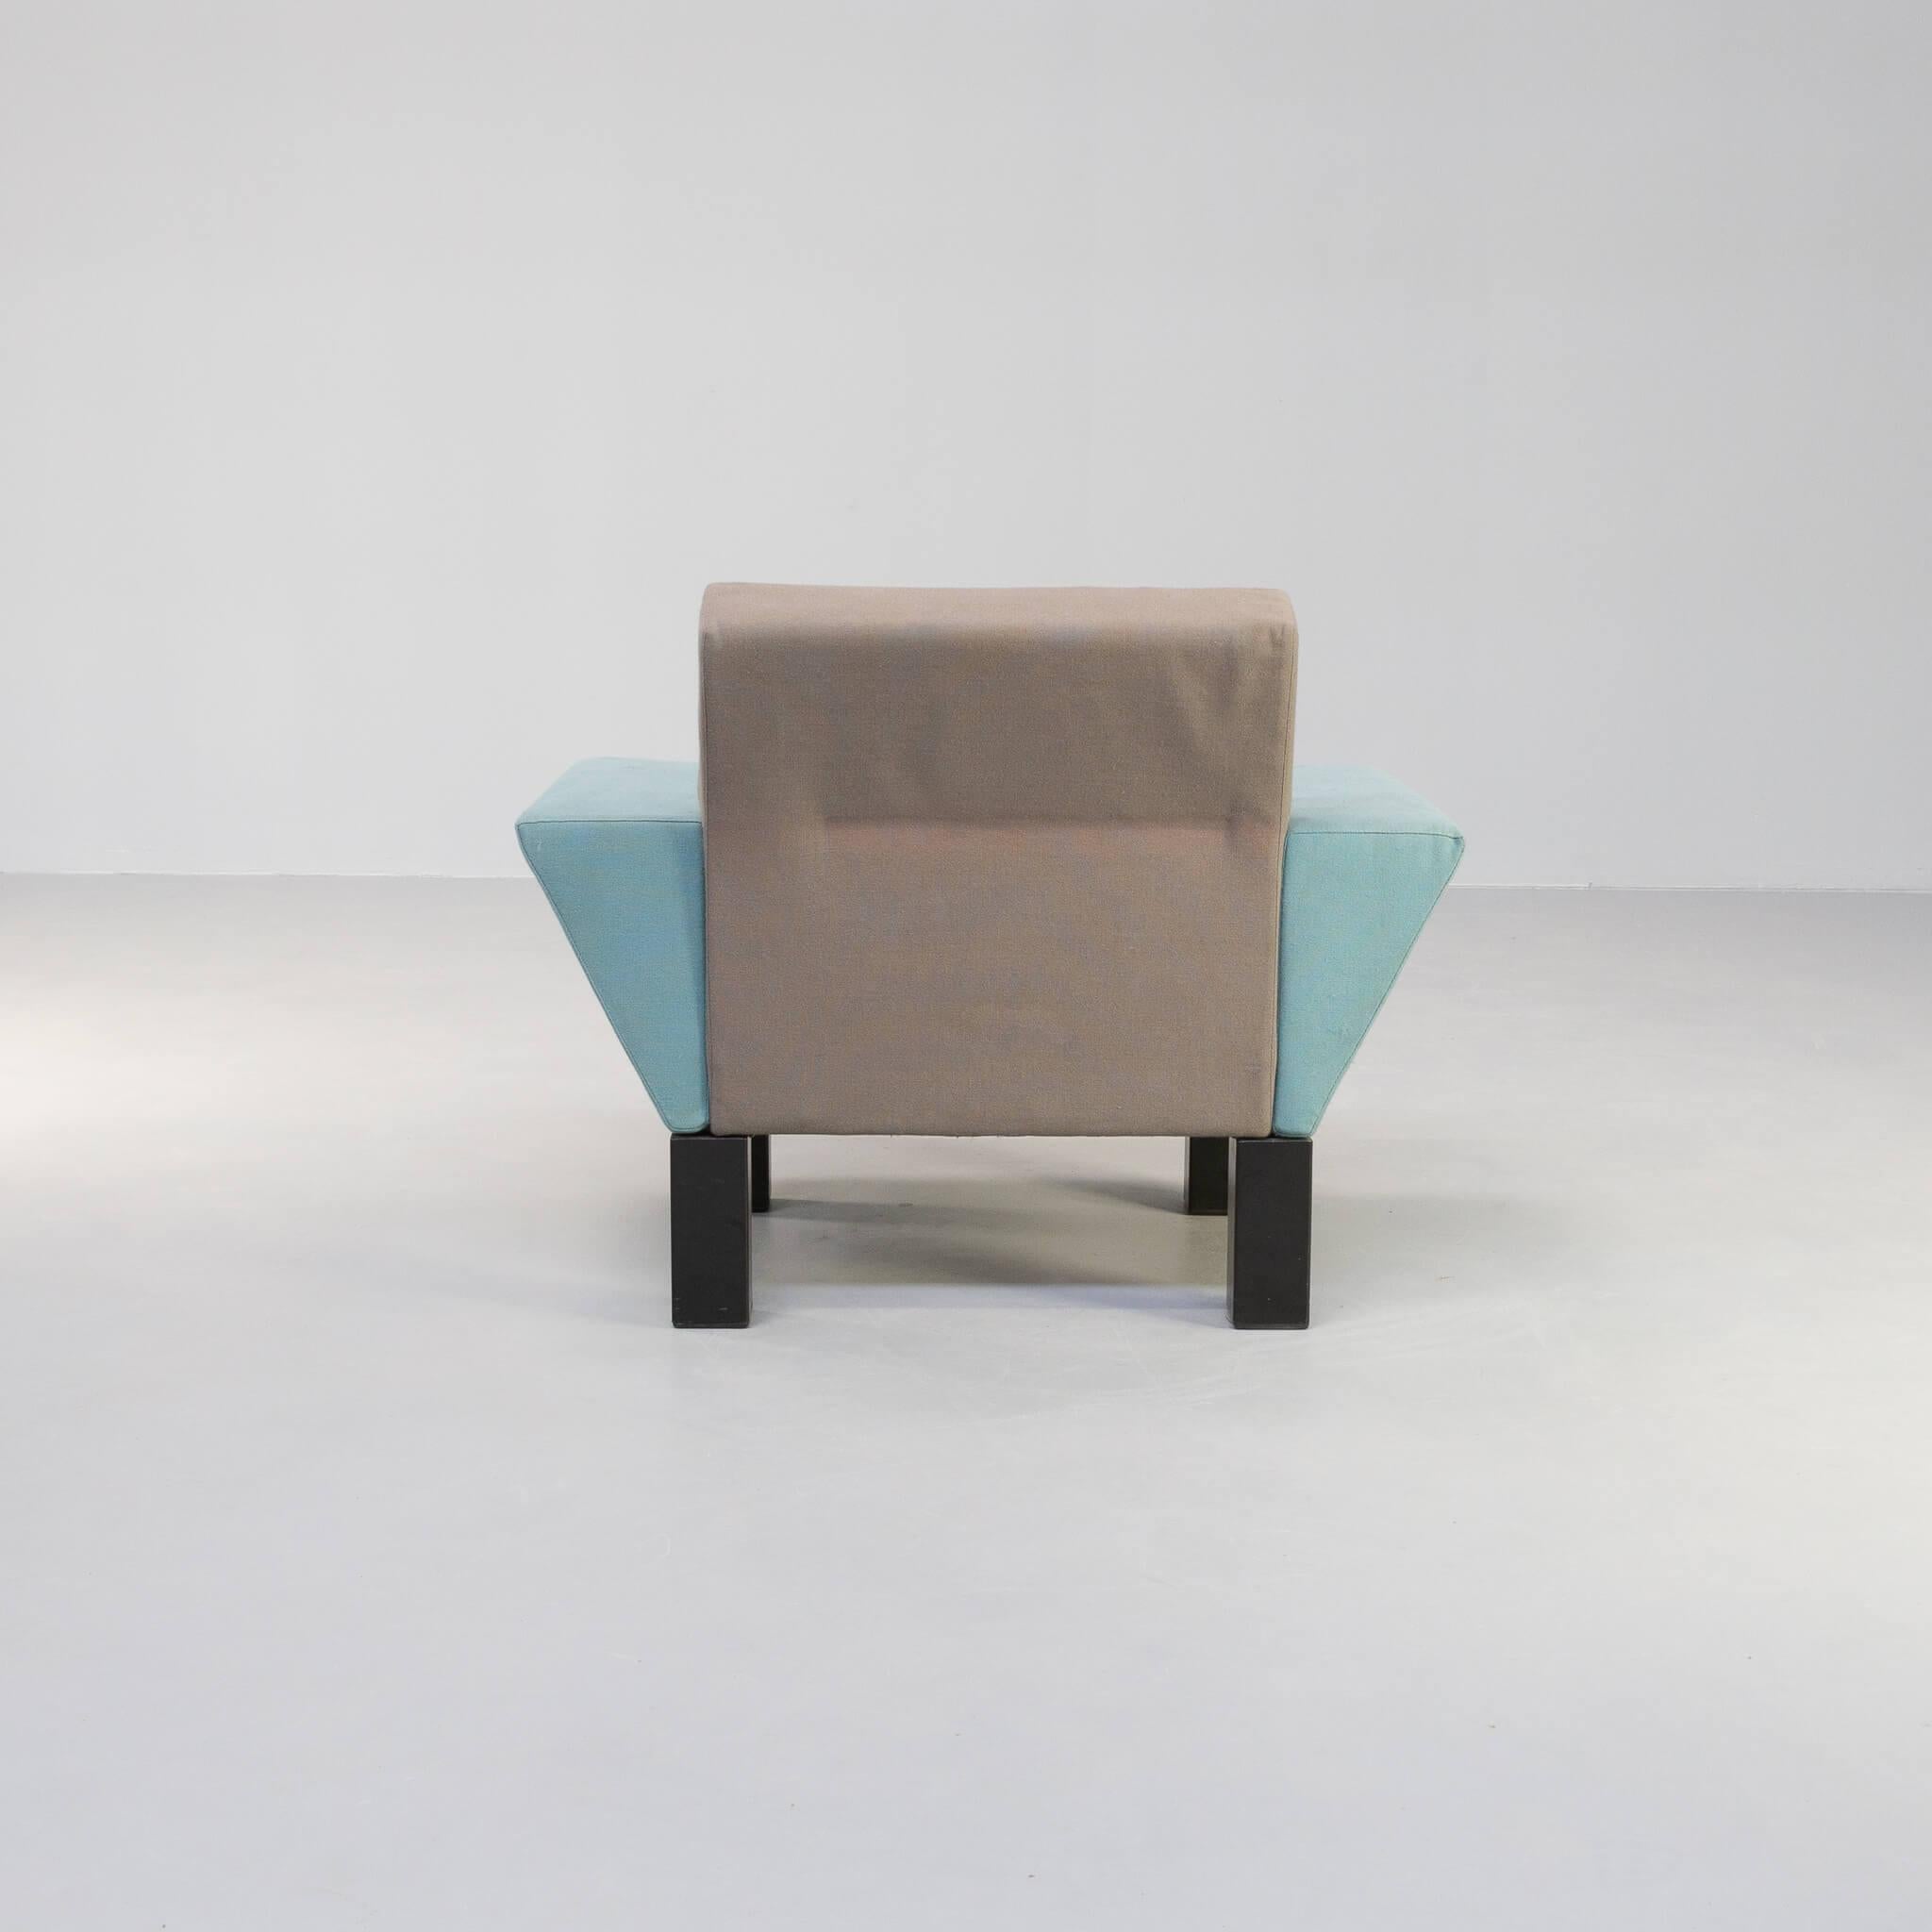 Late 20th Century 80s Ettore Sottsass ‘Westside’ Lounge Chair for Knoll For Sale